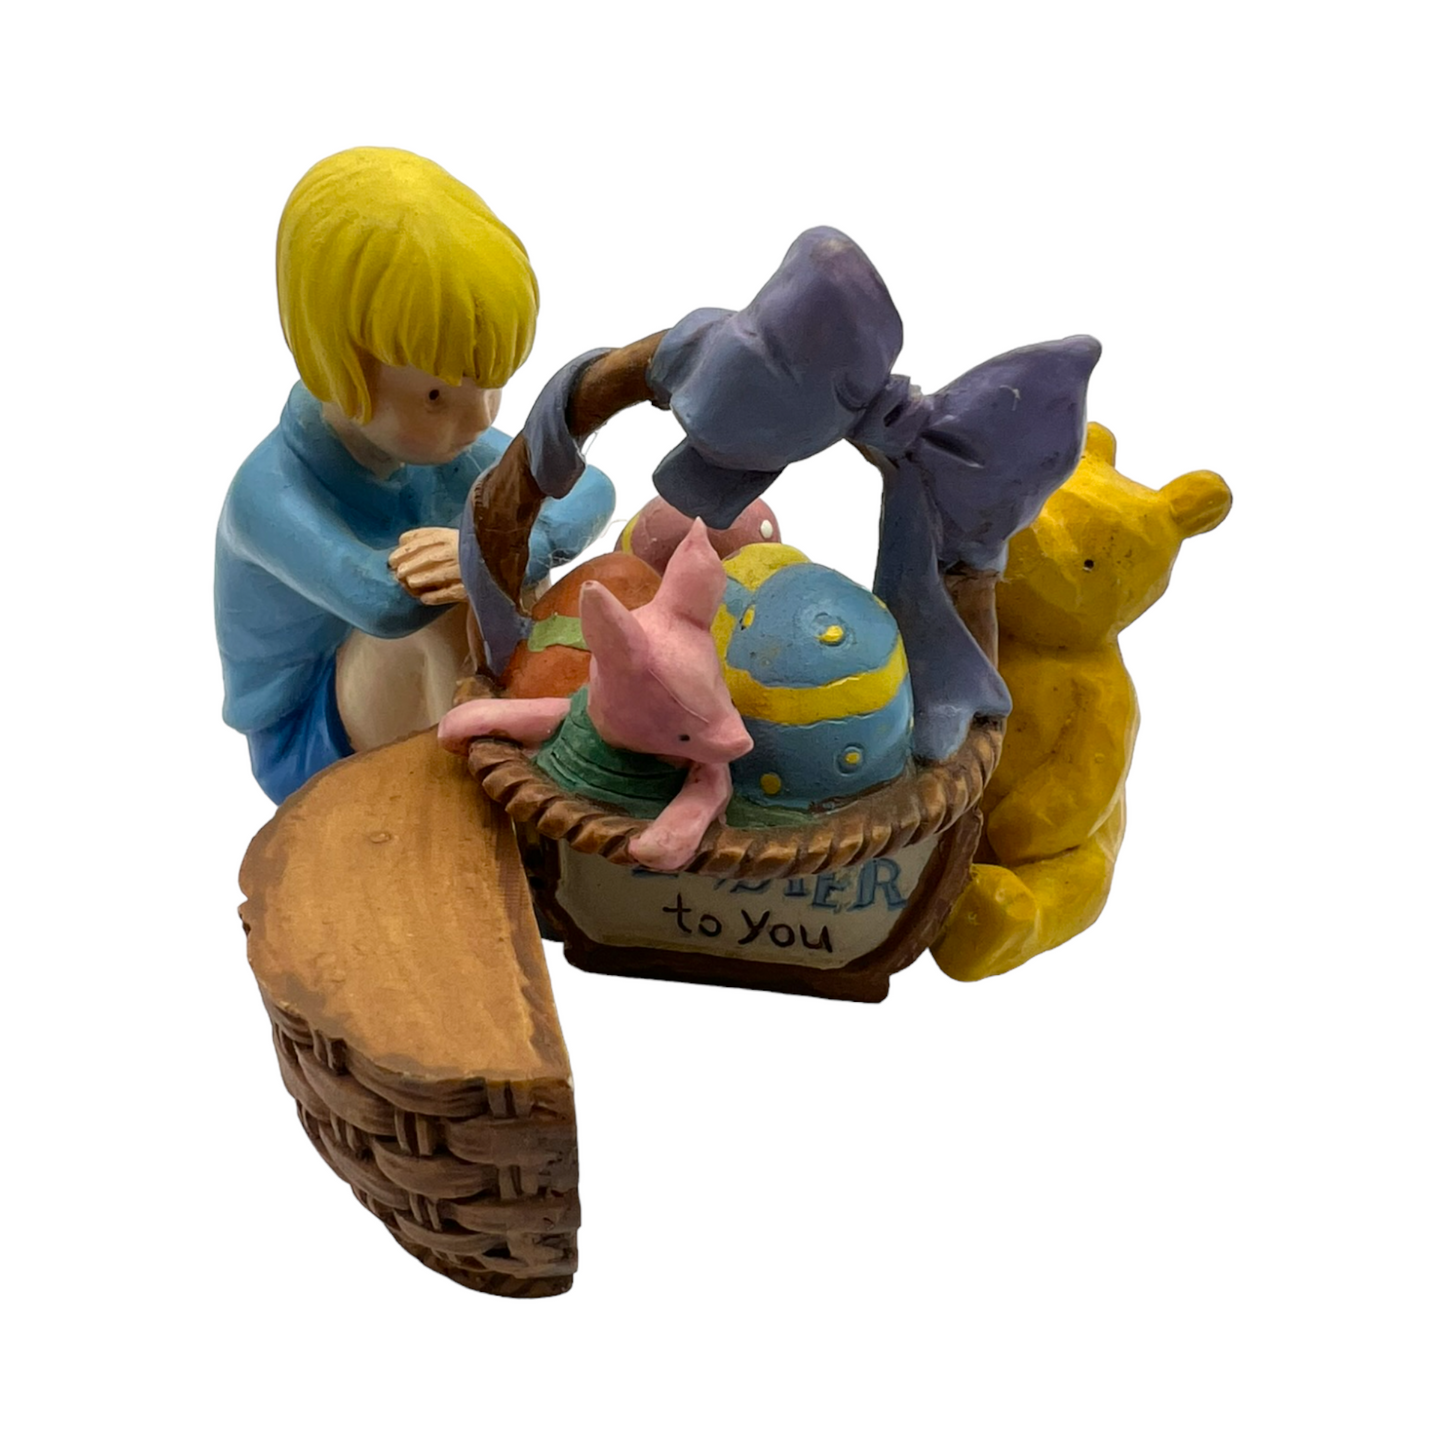 Disney - Winnie The Pooh - A Very /happy Easter To You - Vintage - 2.75"